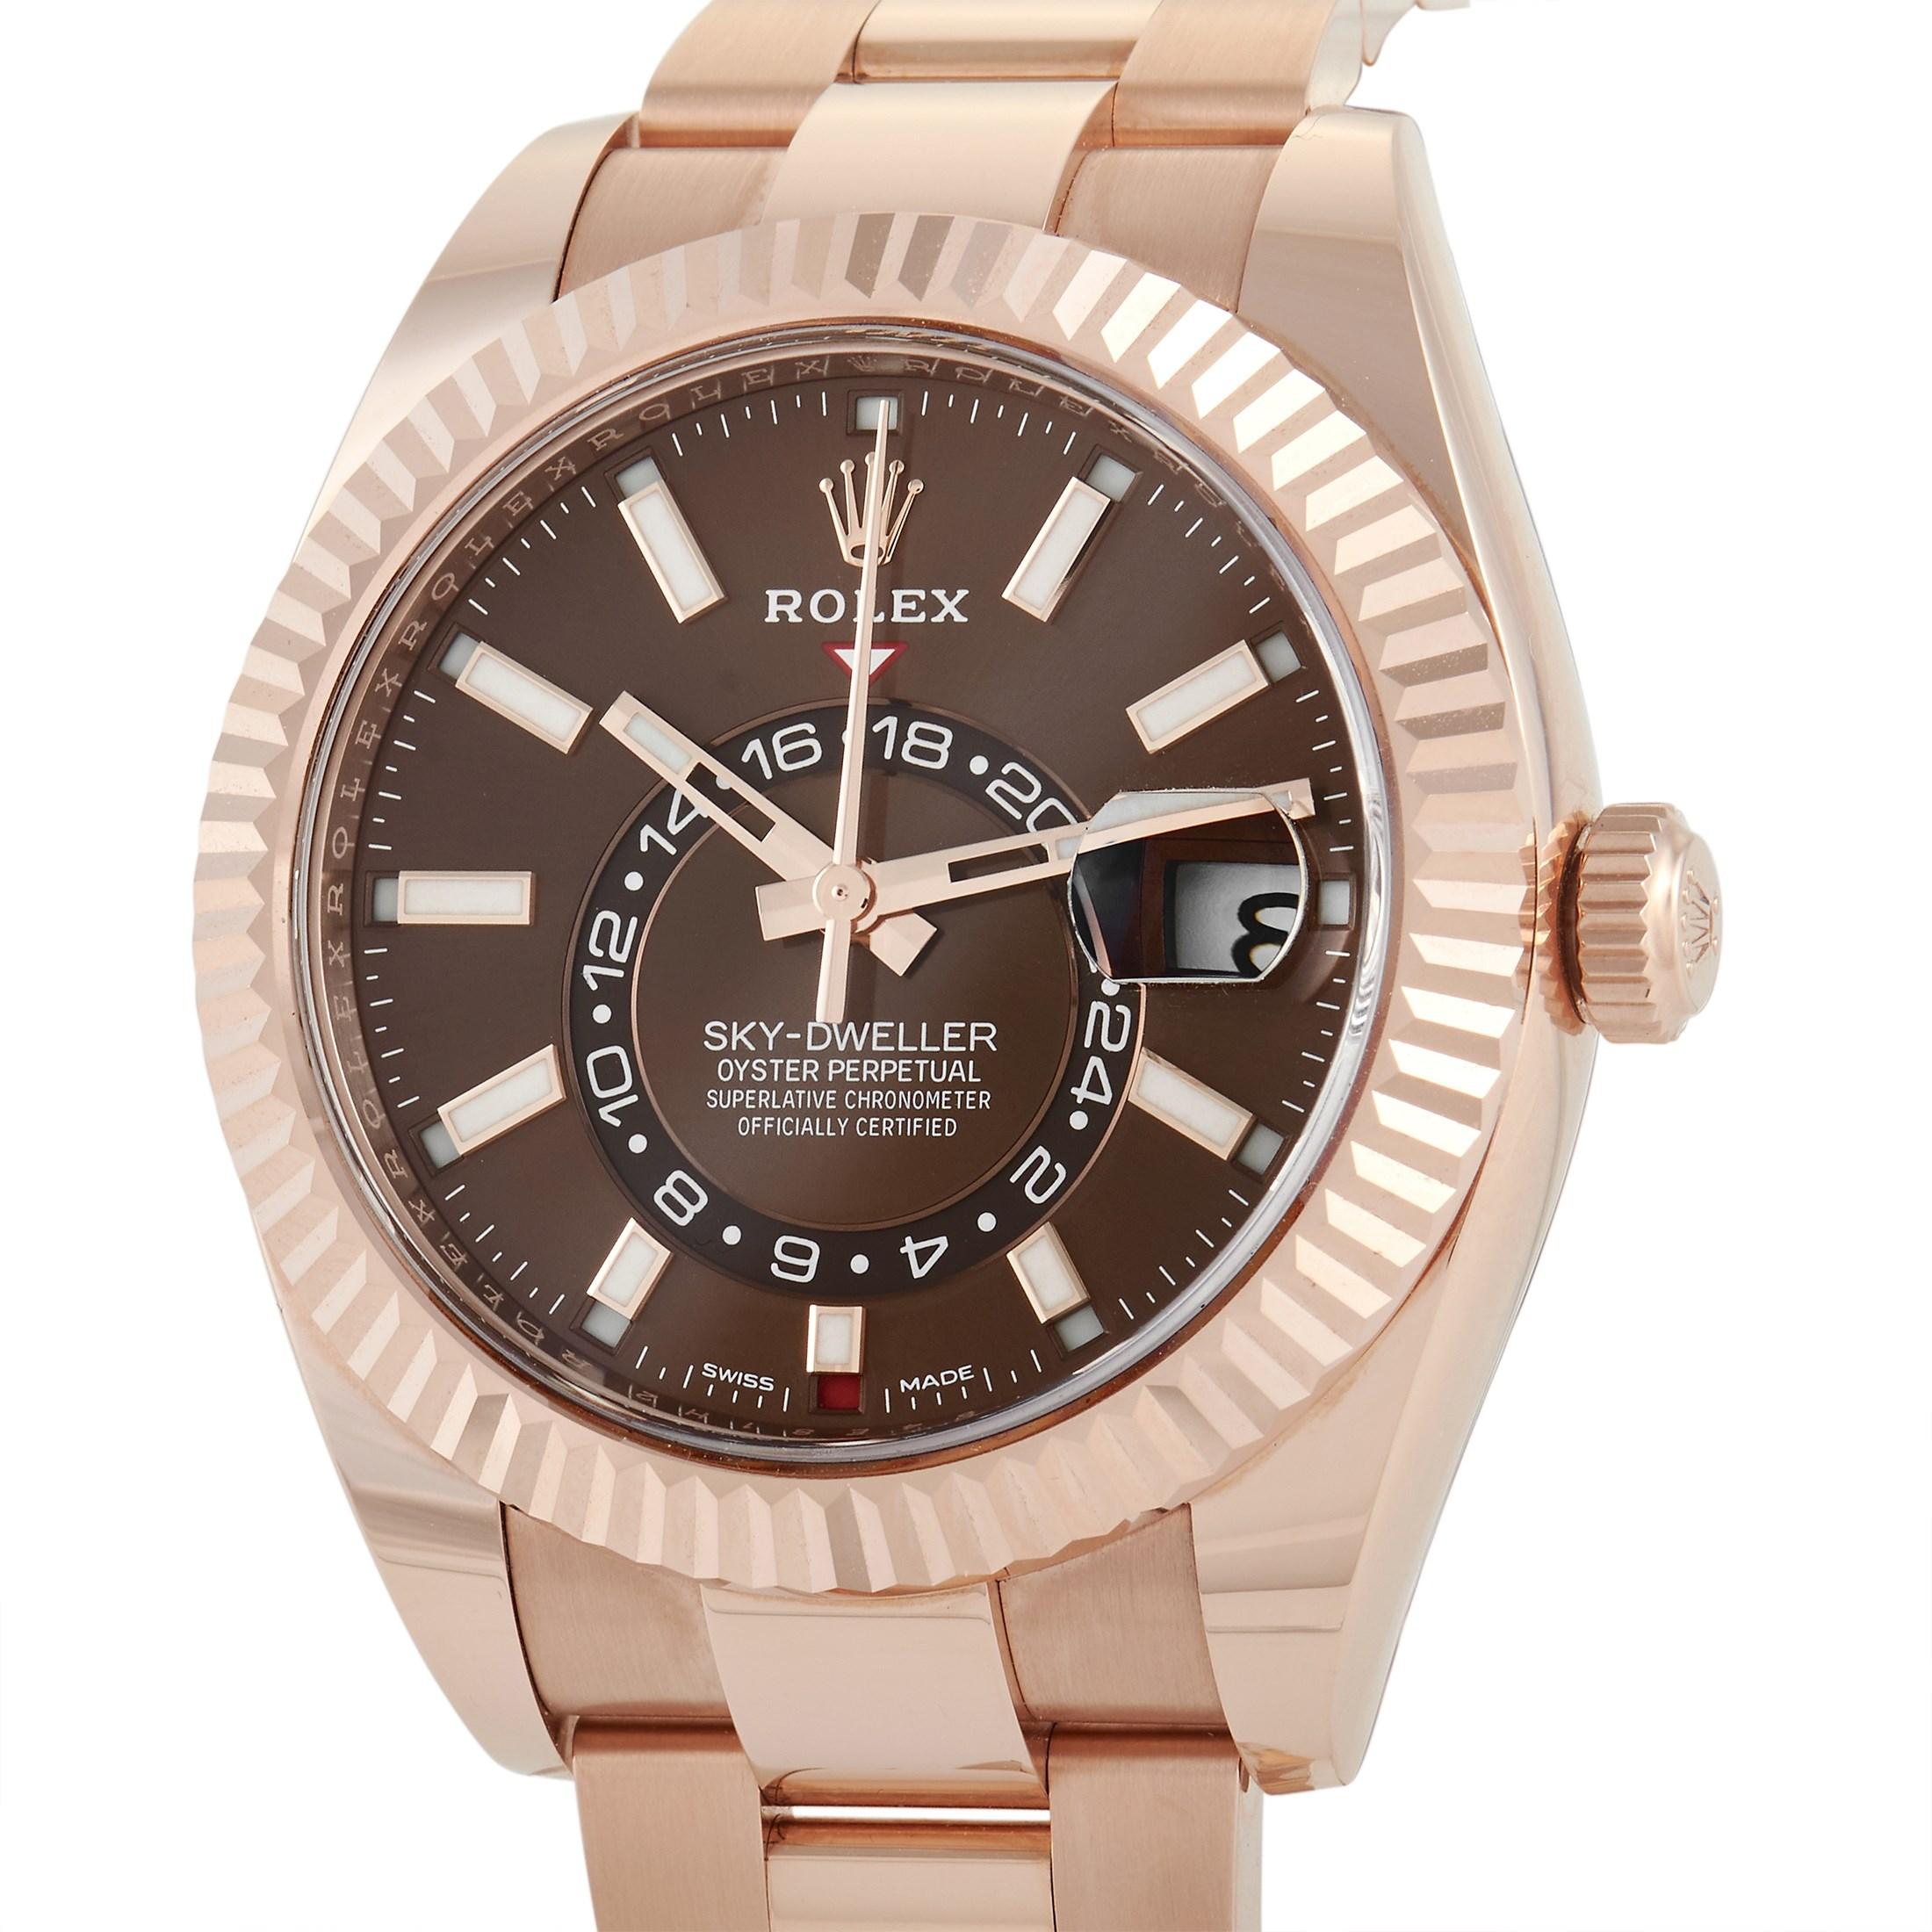 This Rolex Sky Dweller Everose Gold Chocolate Dial Men's Watch 326935 will easily become your favorite travel buddy. It's the ultimate travel watch with its annual calendar module and dual time zone. Plus, it's equipped with the Ring Command that